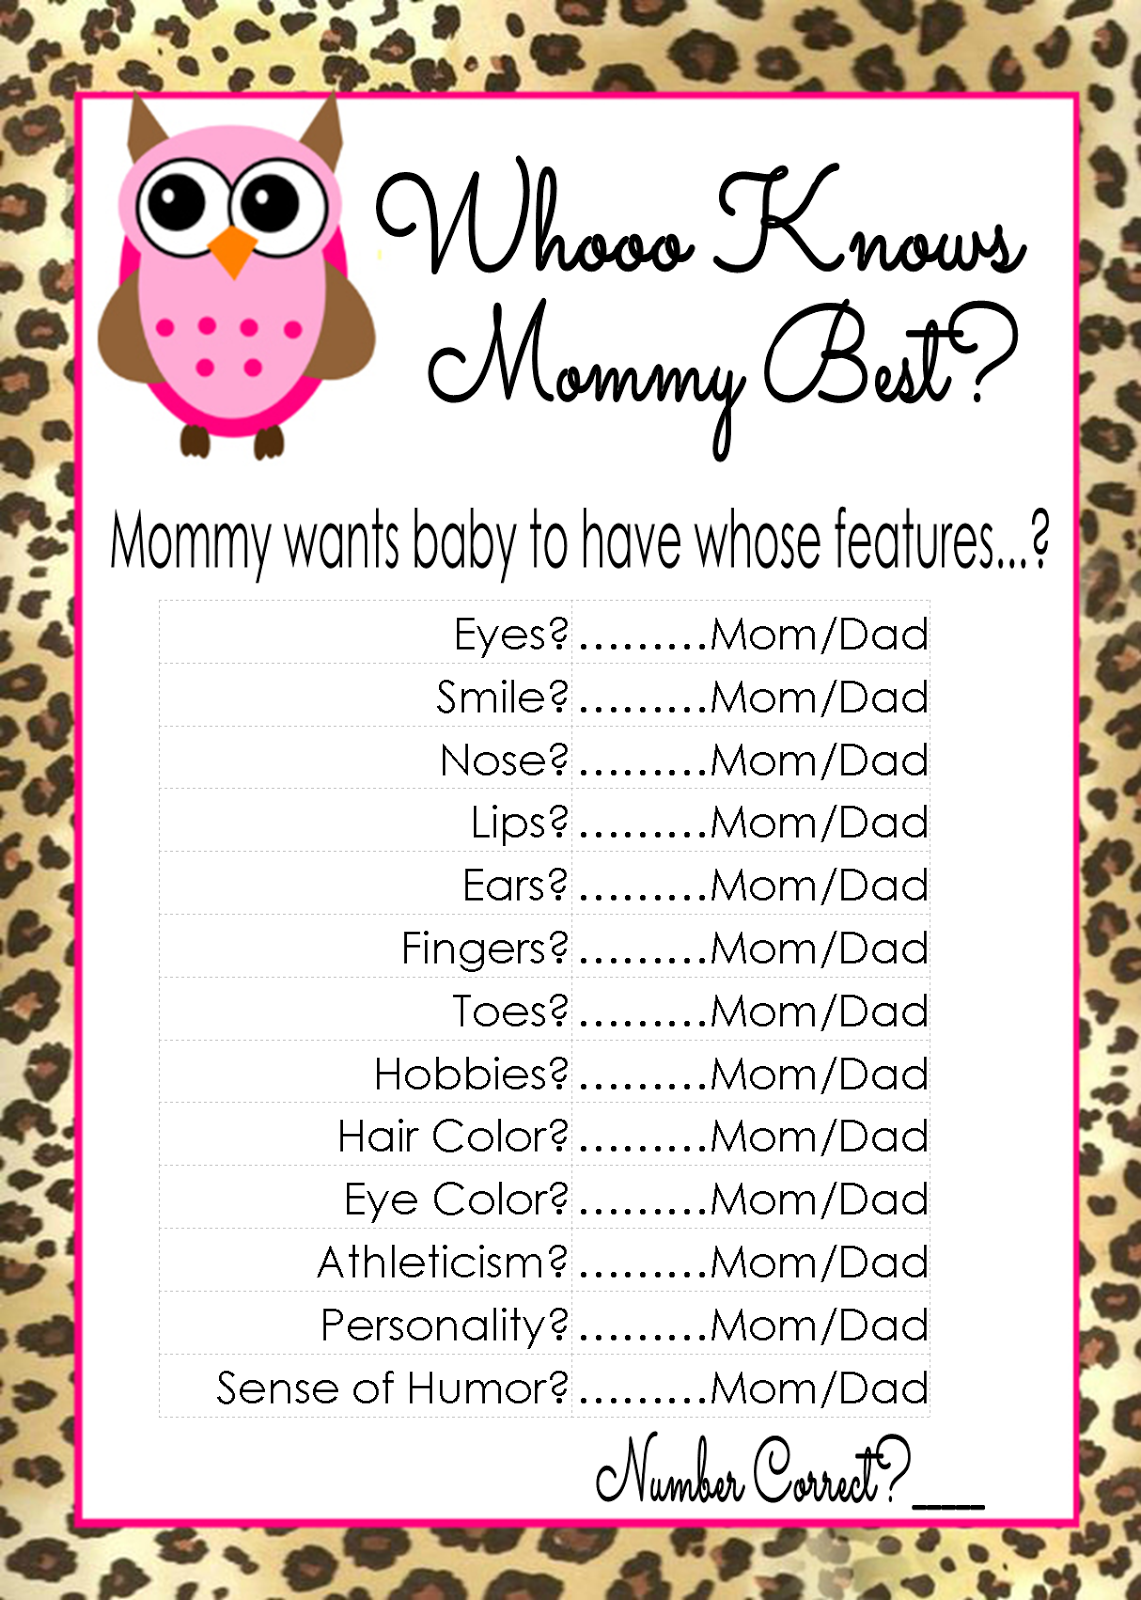 7-best-images-of-who-knows-mommy-best-baby-shower-games-printable-who